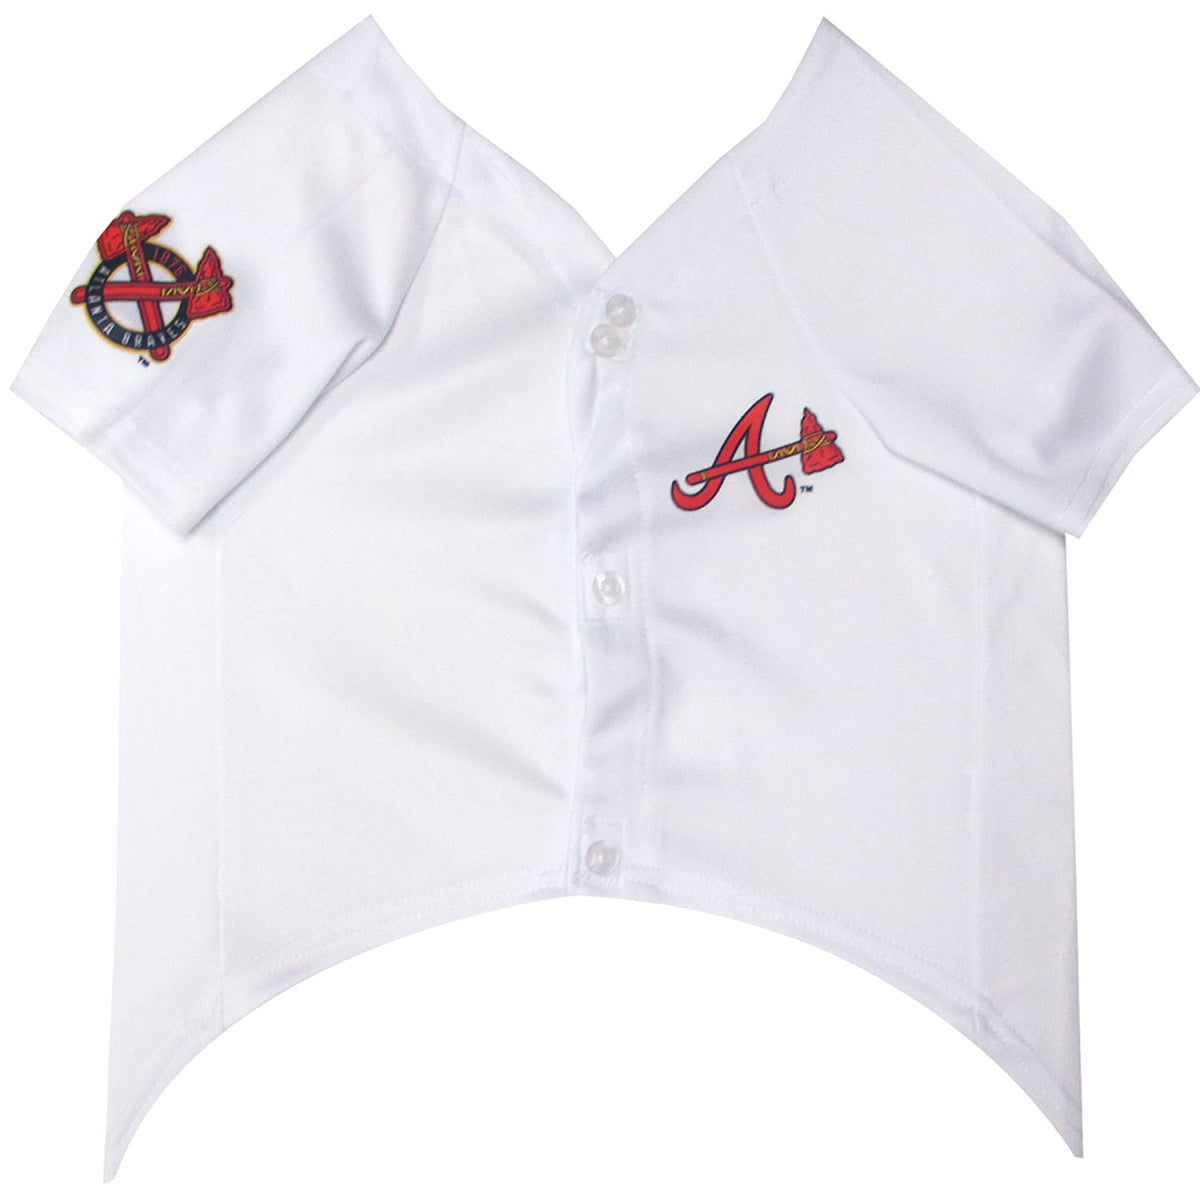 braves button up jersey